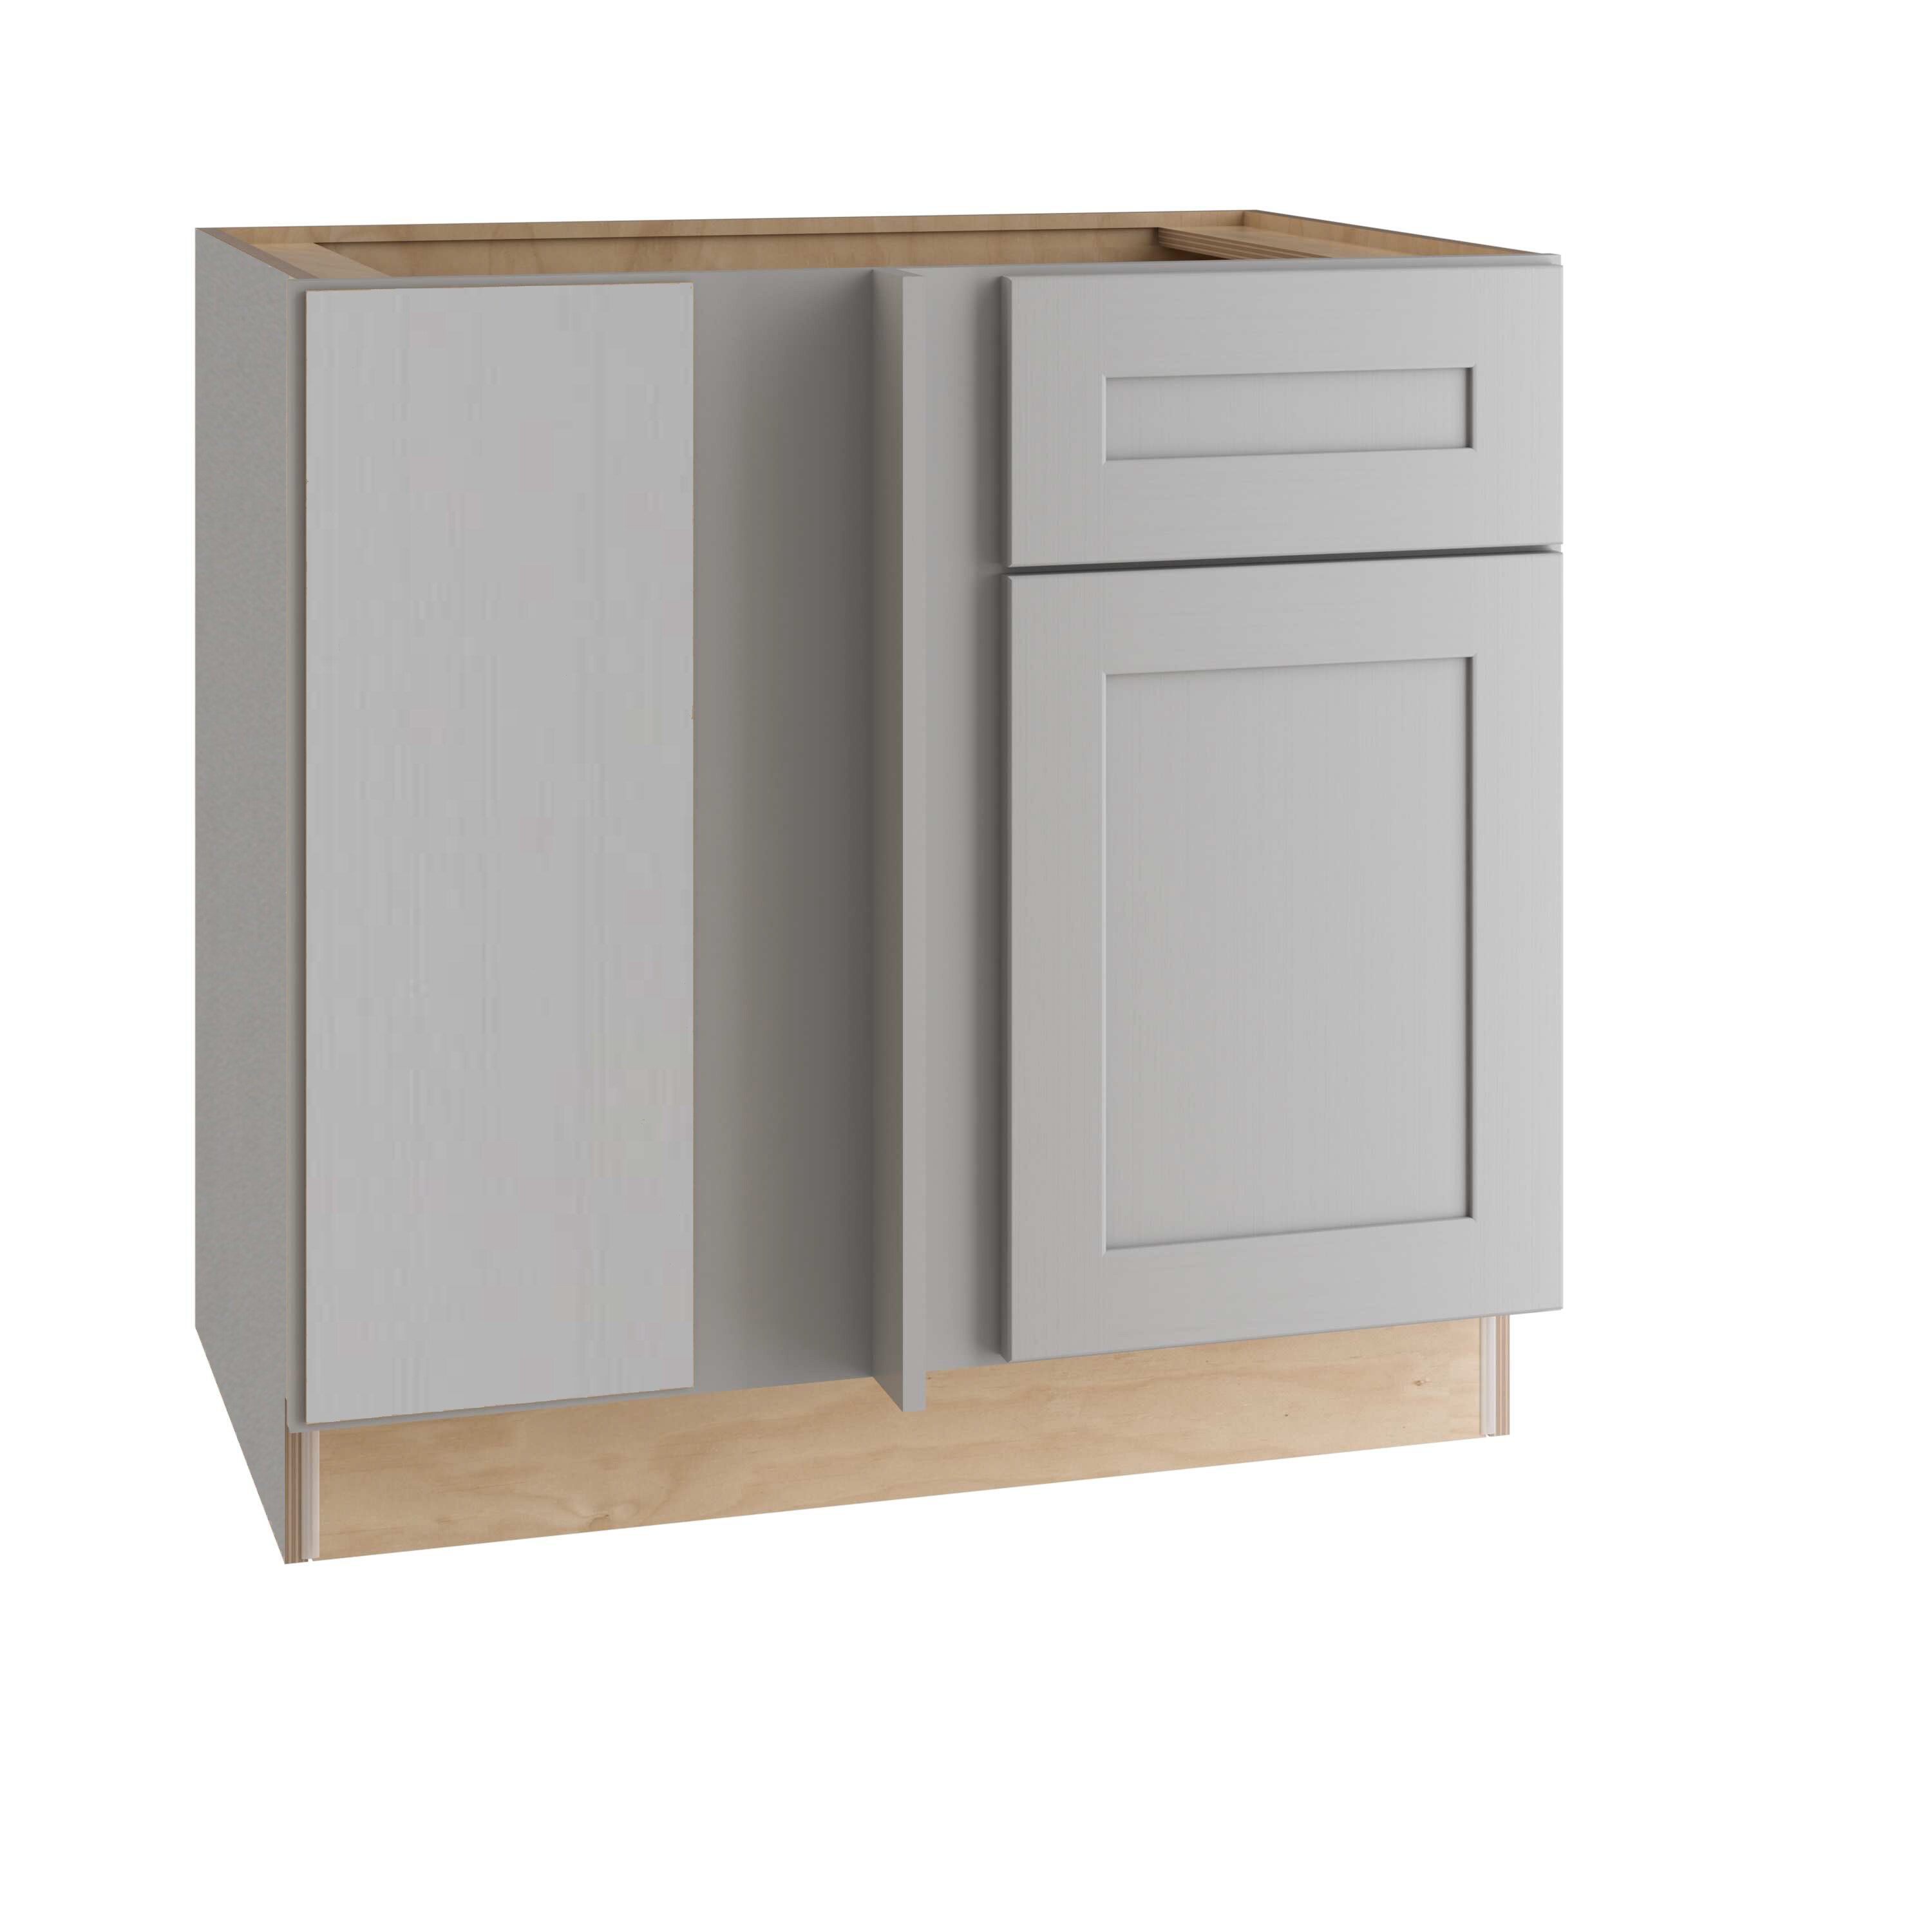 Luxxe Cabinetry Thornbury 36-in W x 34.5-in H x 24-in D Pastel Gray ...